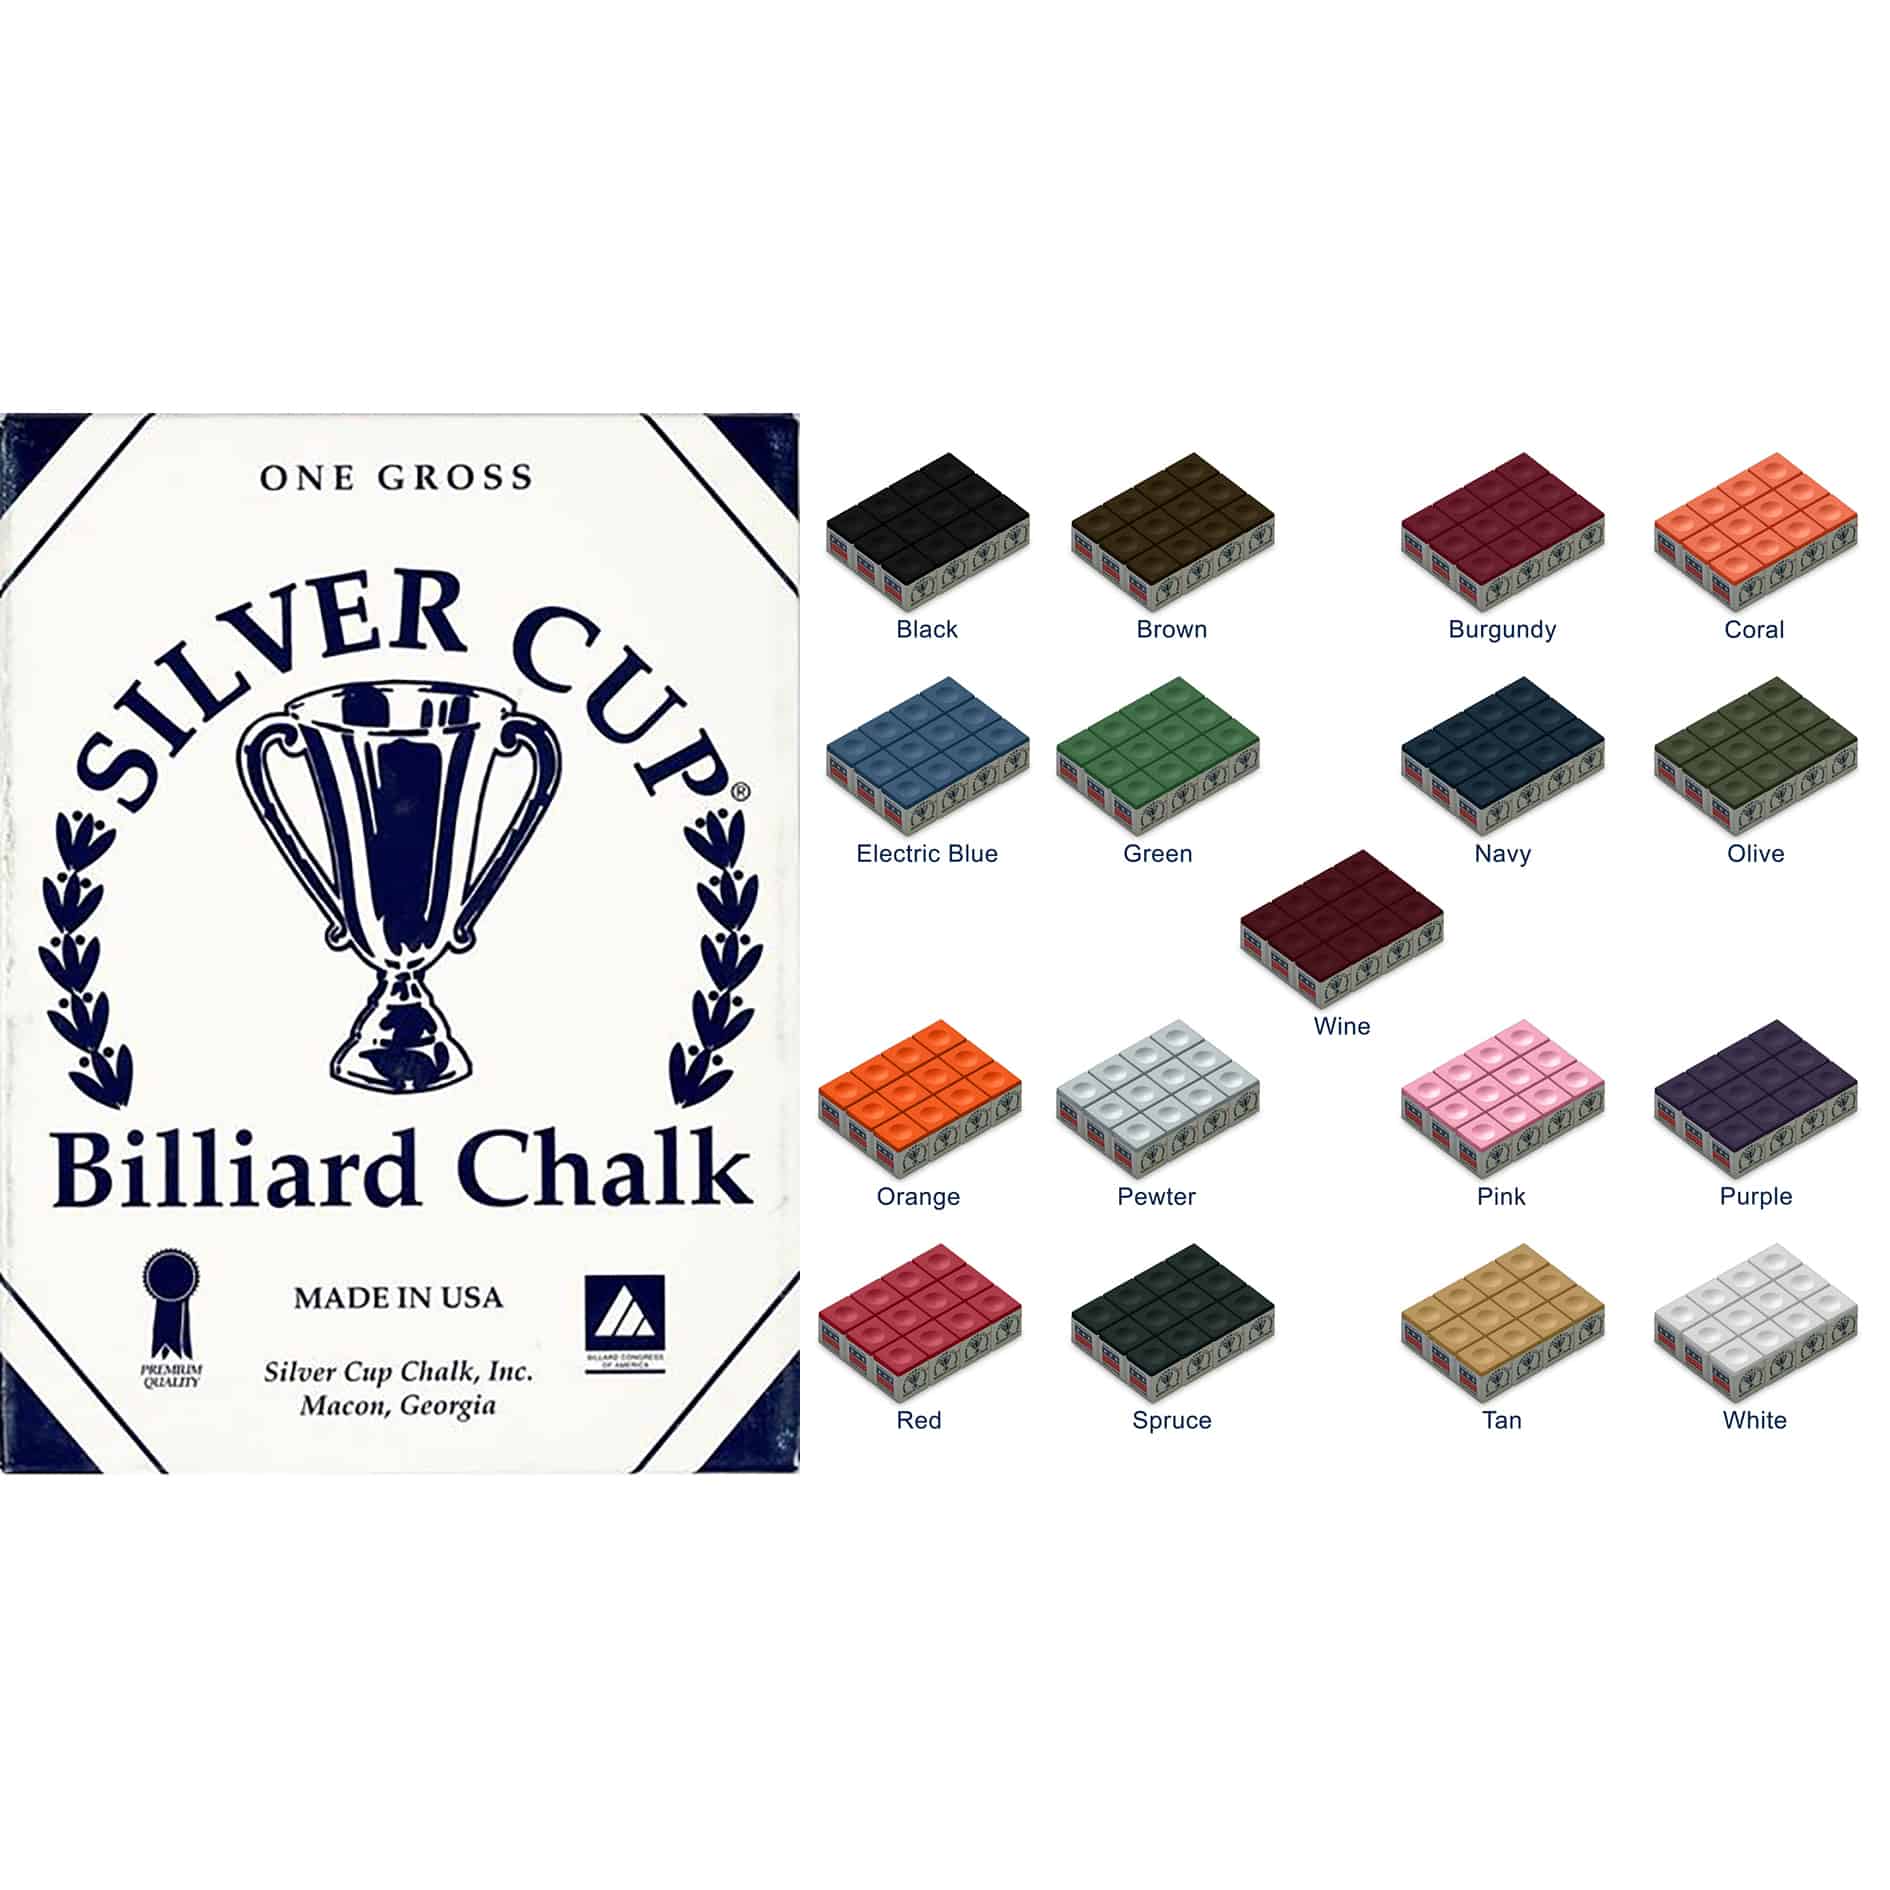 $2.00 value Tournament Green SILVER CUP CHALK free Cue Clean sample 1Dz 